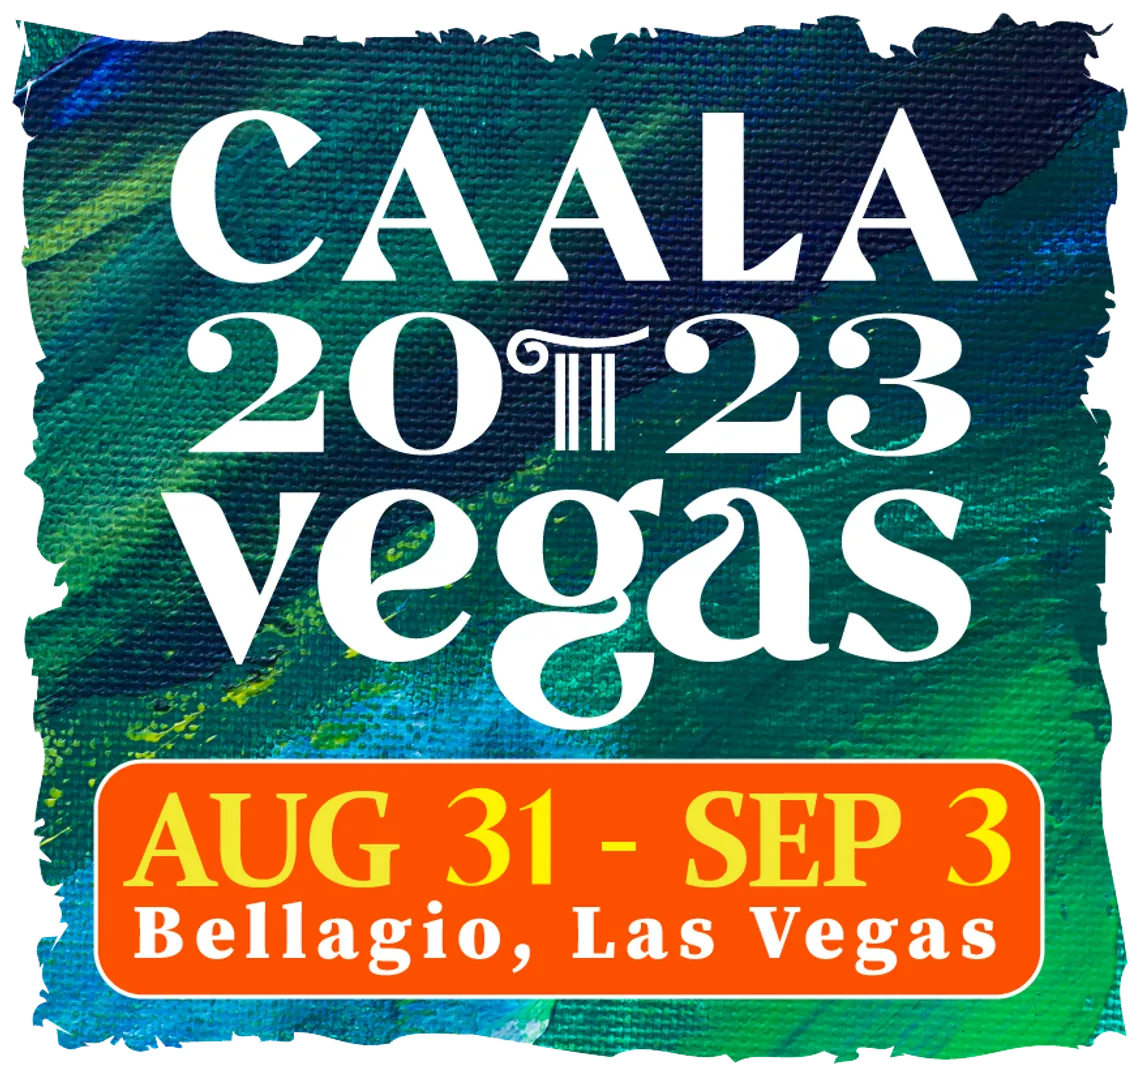 Day One Is In The Books At Bellagio - What Was Everyone's Opinion Of Opening Day At CAALA?  Today's Education Sessions Look Solid!  

Enjoy | Learn | Network | Expand Your Knowledge | Advocacy 

#CAAALAVegas2023  #CAALA  #TrialLawyers  #LasVegas  #Seminars  #Education 